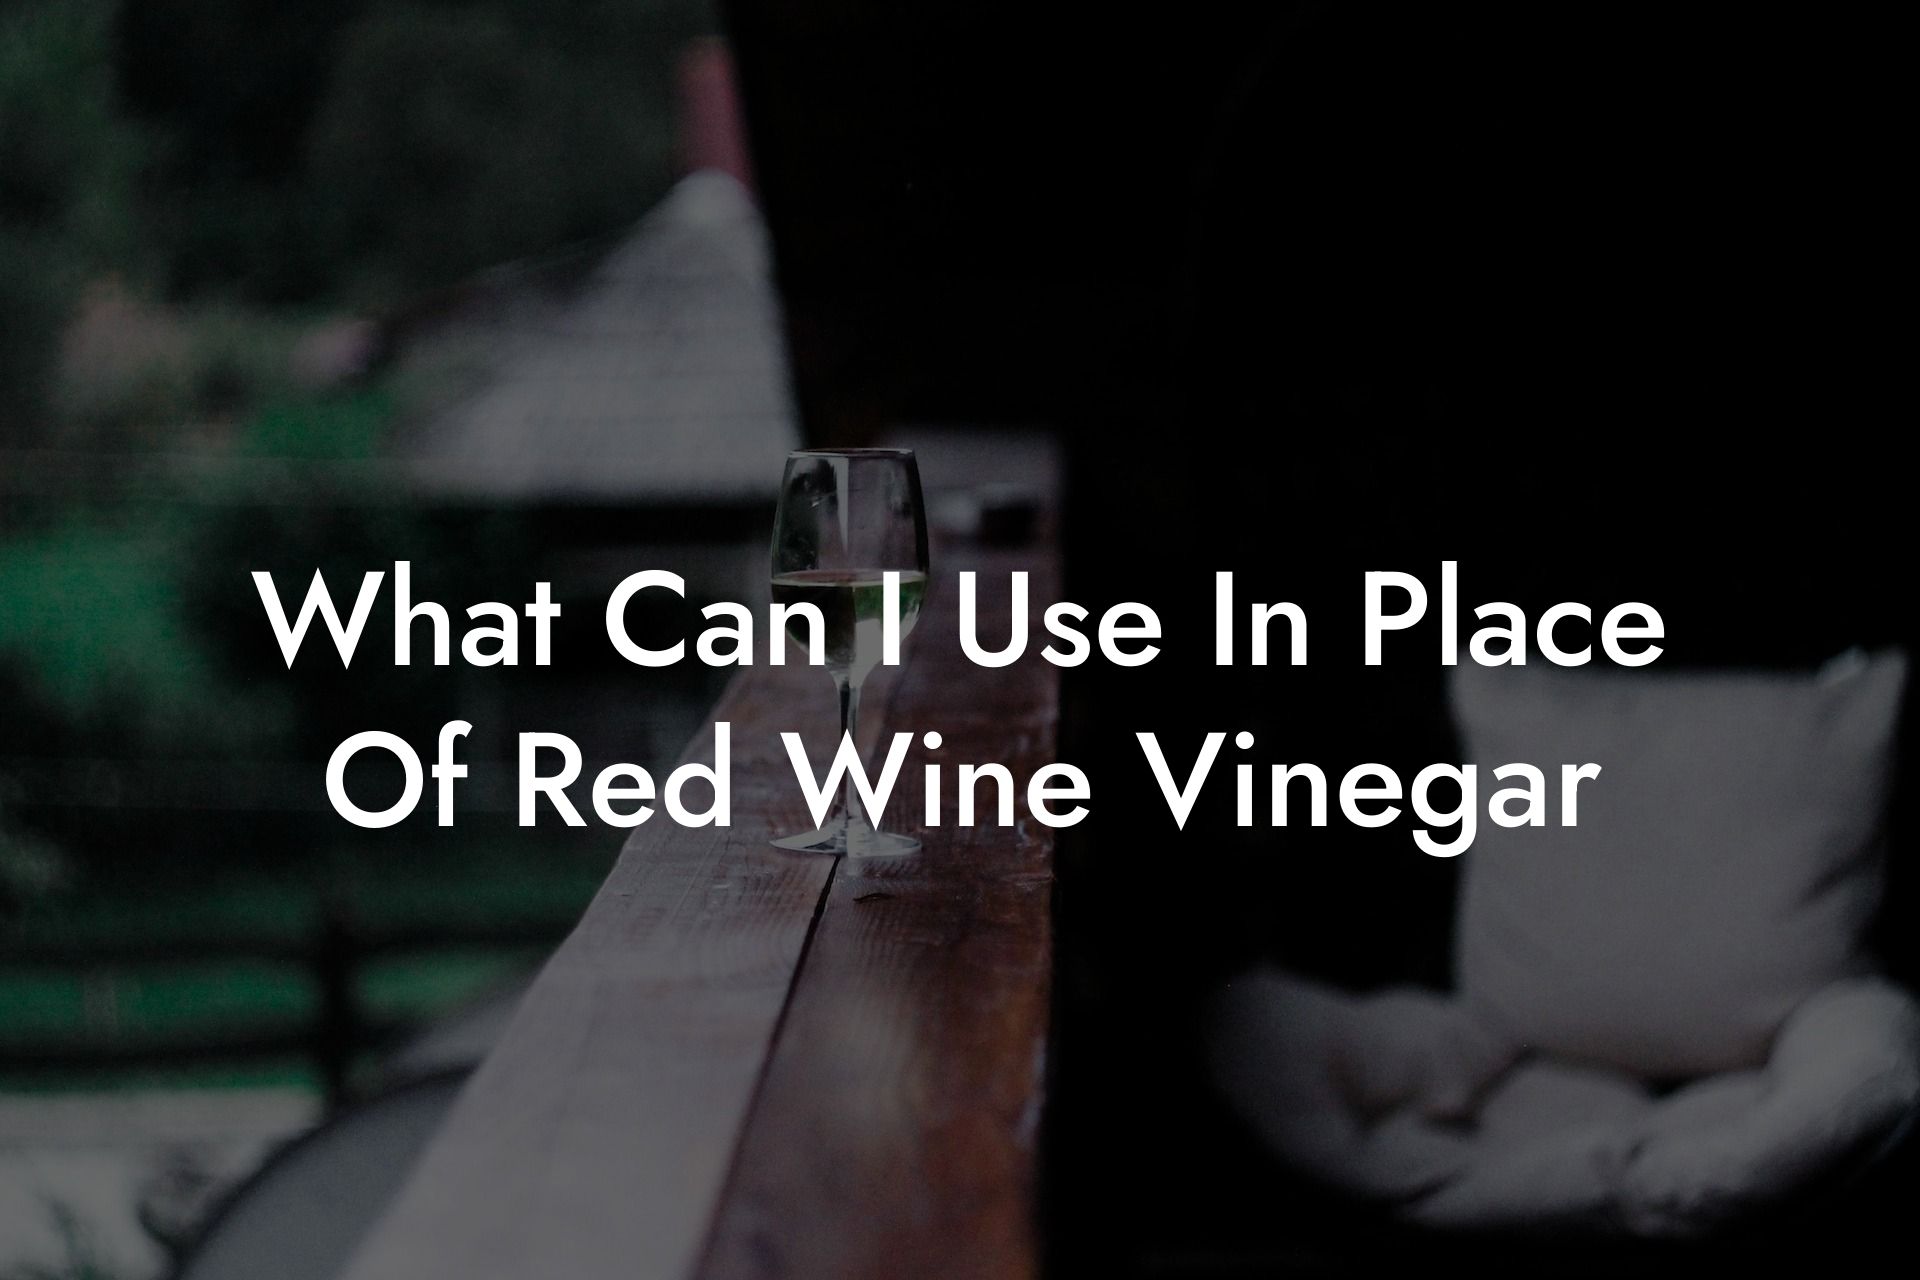 What Can I Use In Place Of Red Wine Vinegar